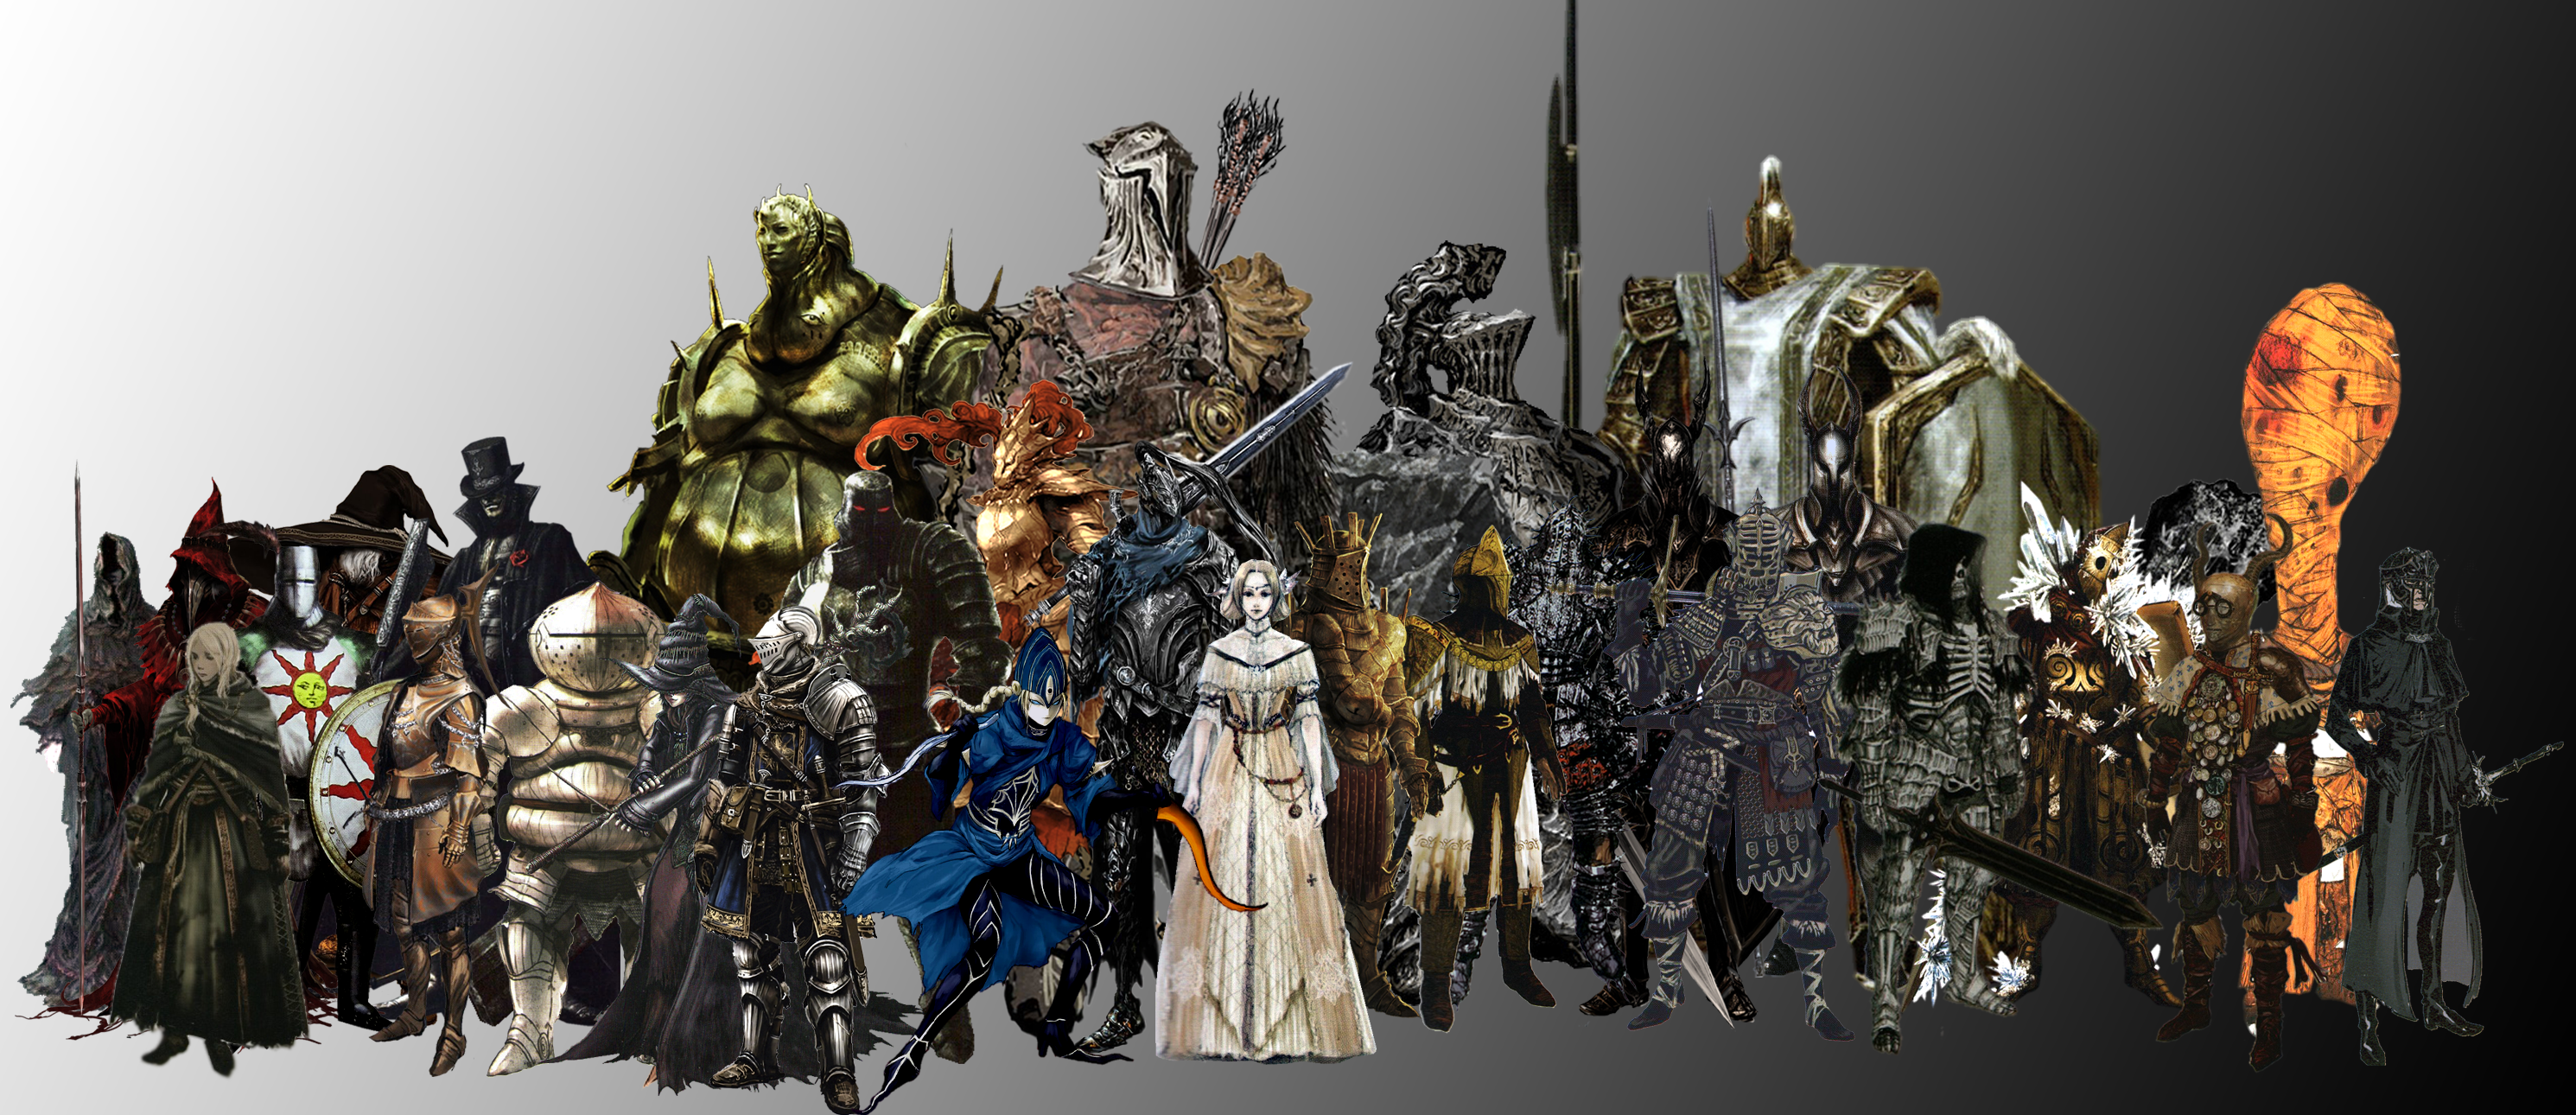 Dark Souls main characters by GIOVANNIMICARELLI on